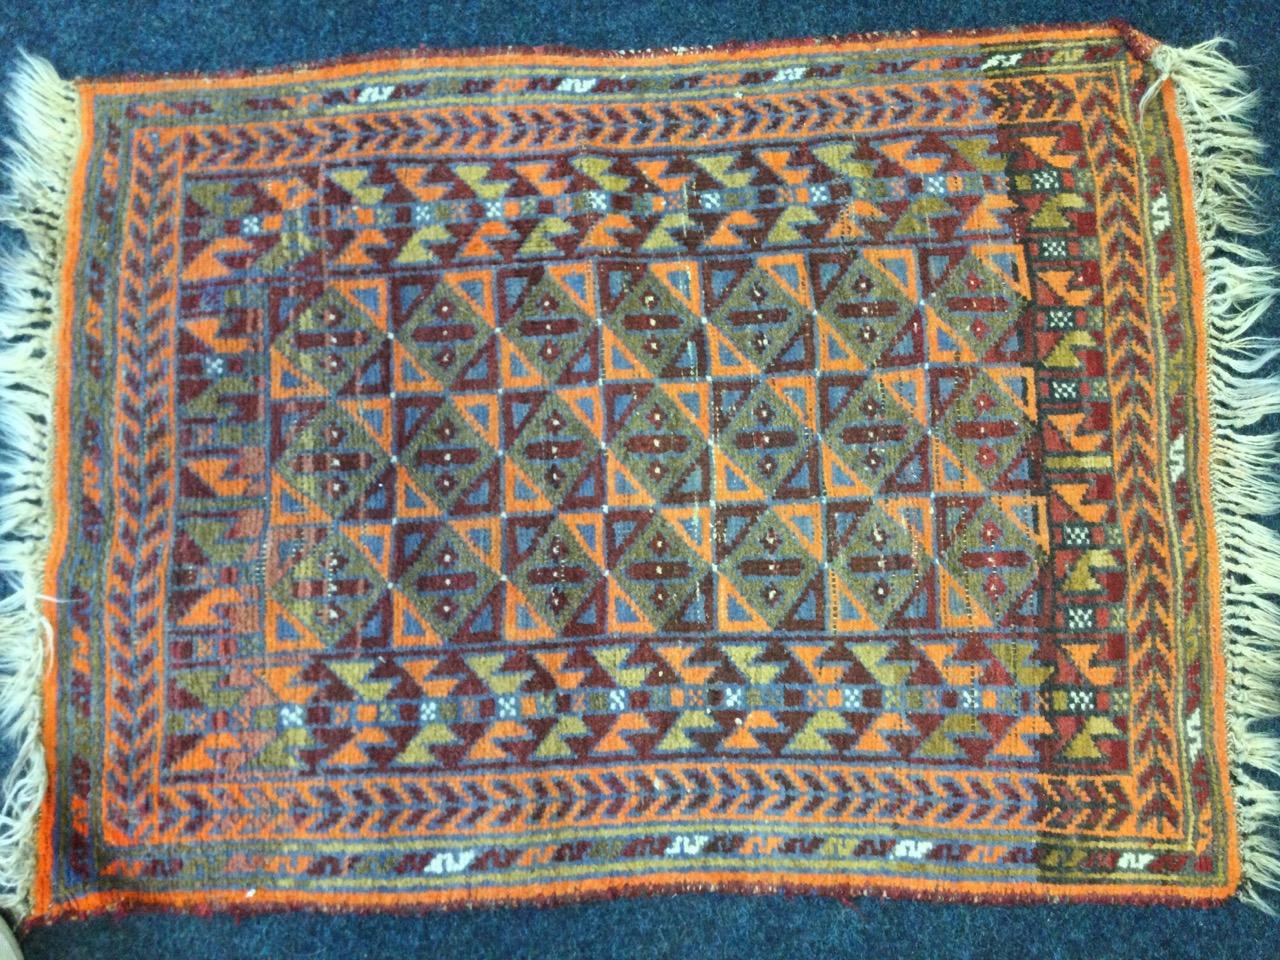 A Turkish rug woven with field of triangular & square panels framed by border of winged bat type